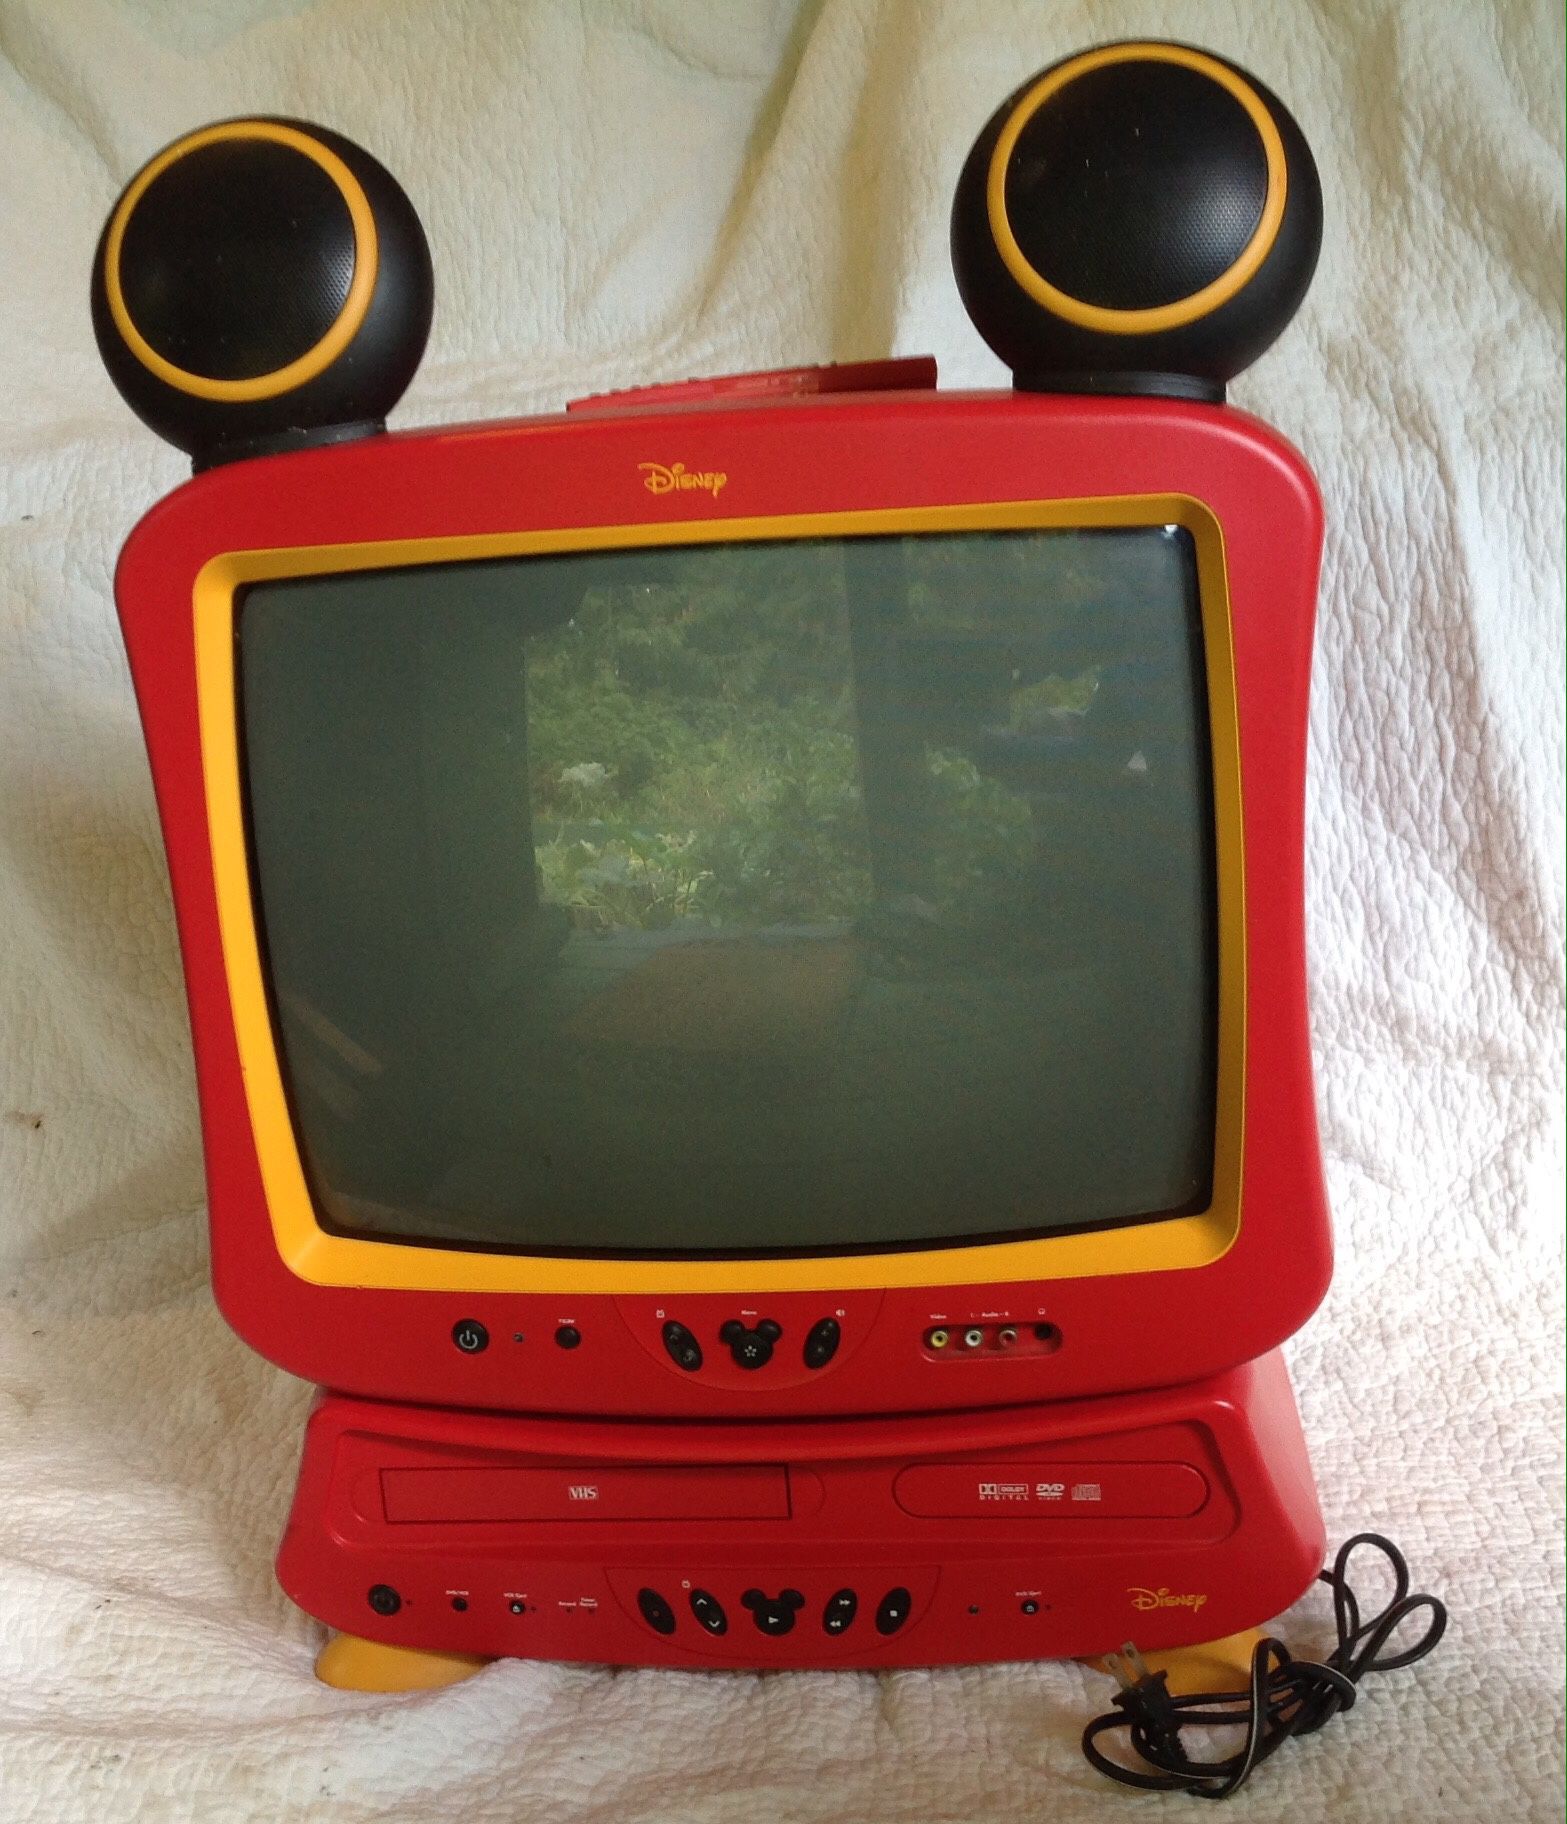 Fun Disney TV, DVD, VHS Combo for kids room, works great...